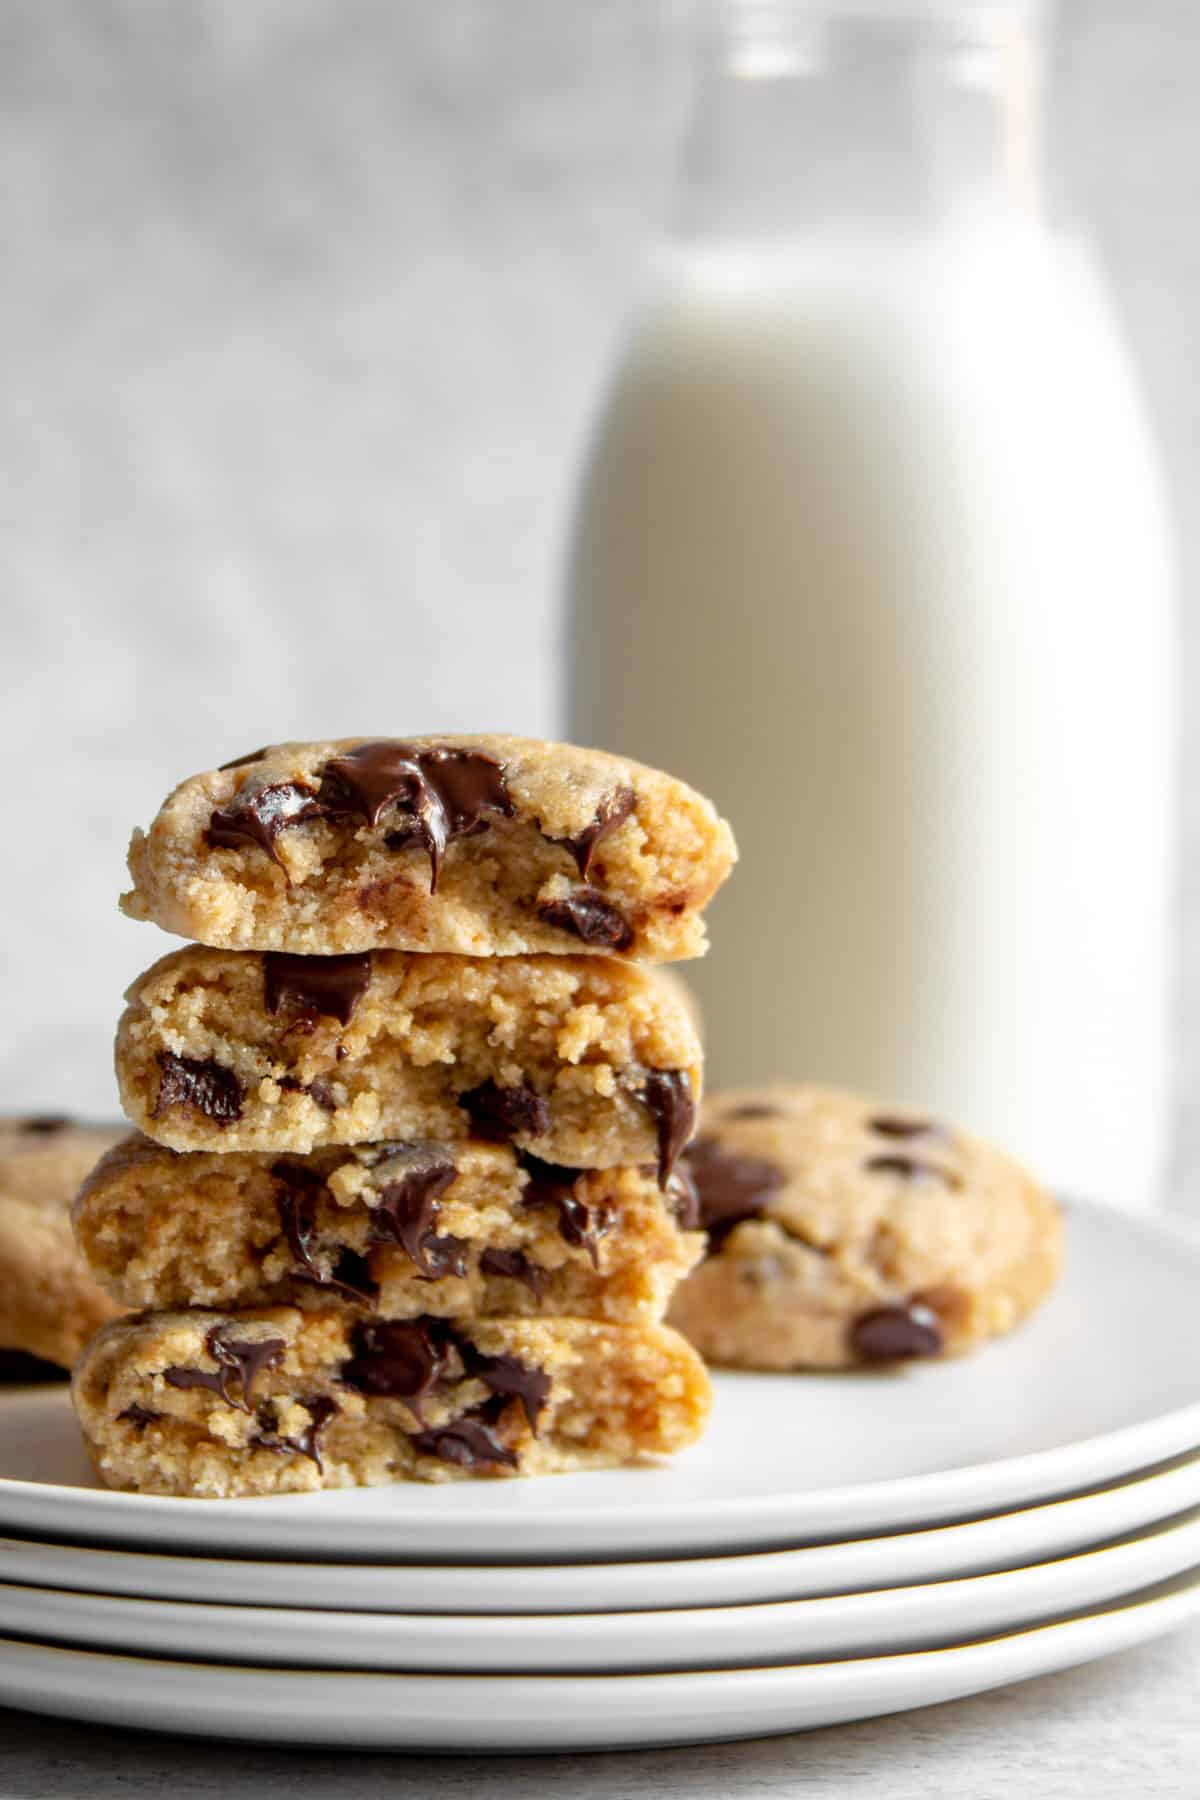 stack of four half cookies showing melted chocolate chips with milk in background